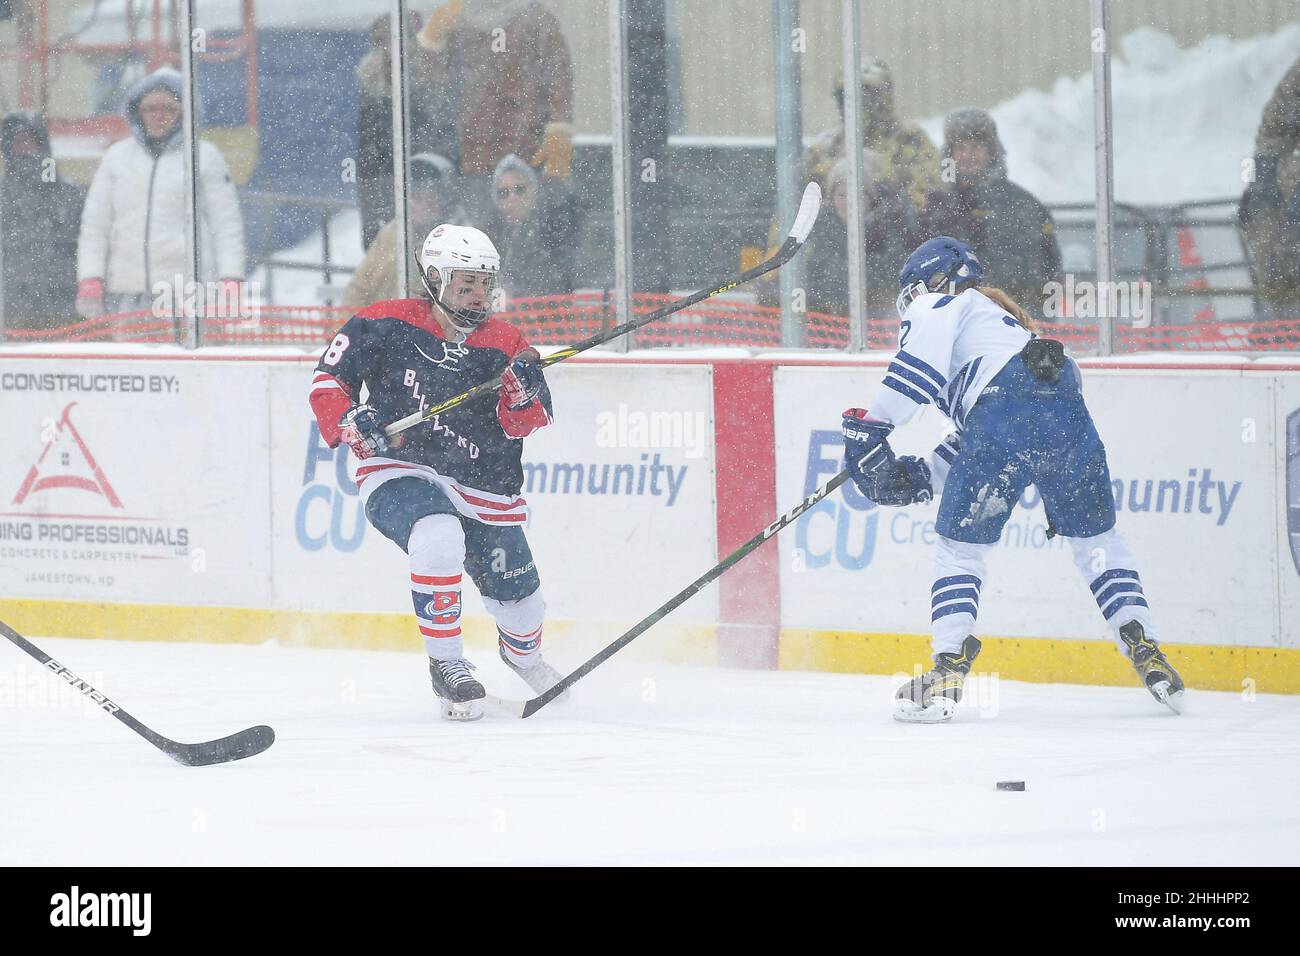 The Bismarck Blizzard and Jamestown Blue Jay girls hockey teams compete during the 3rd annual Hockey Day North Dakota outdoor hockey event in Jamestown, ND. Youth, high school and college hockey teams from around North Dakota competed over two days. By Russell Hons/CSM Stock Photo